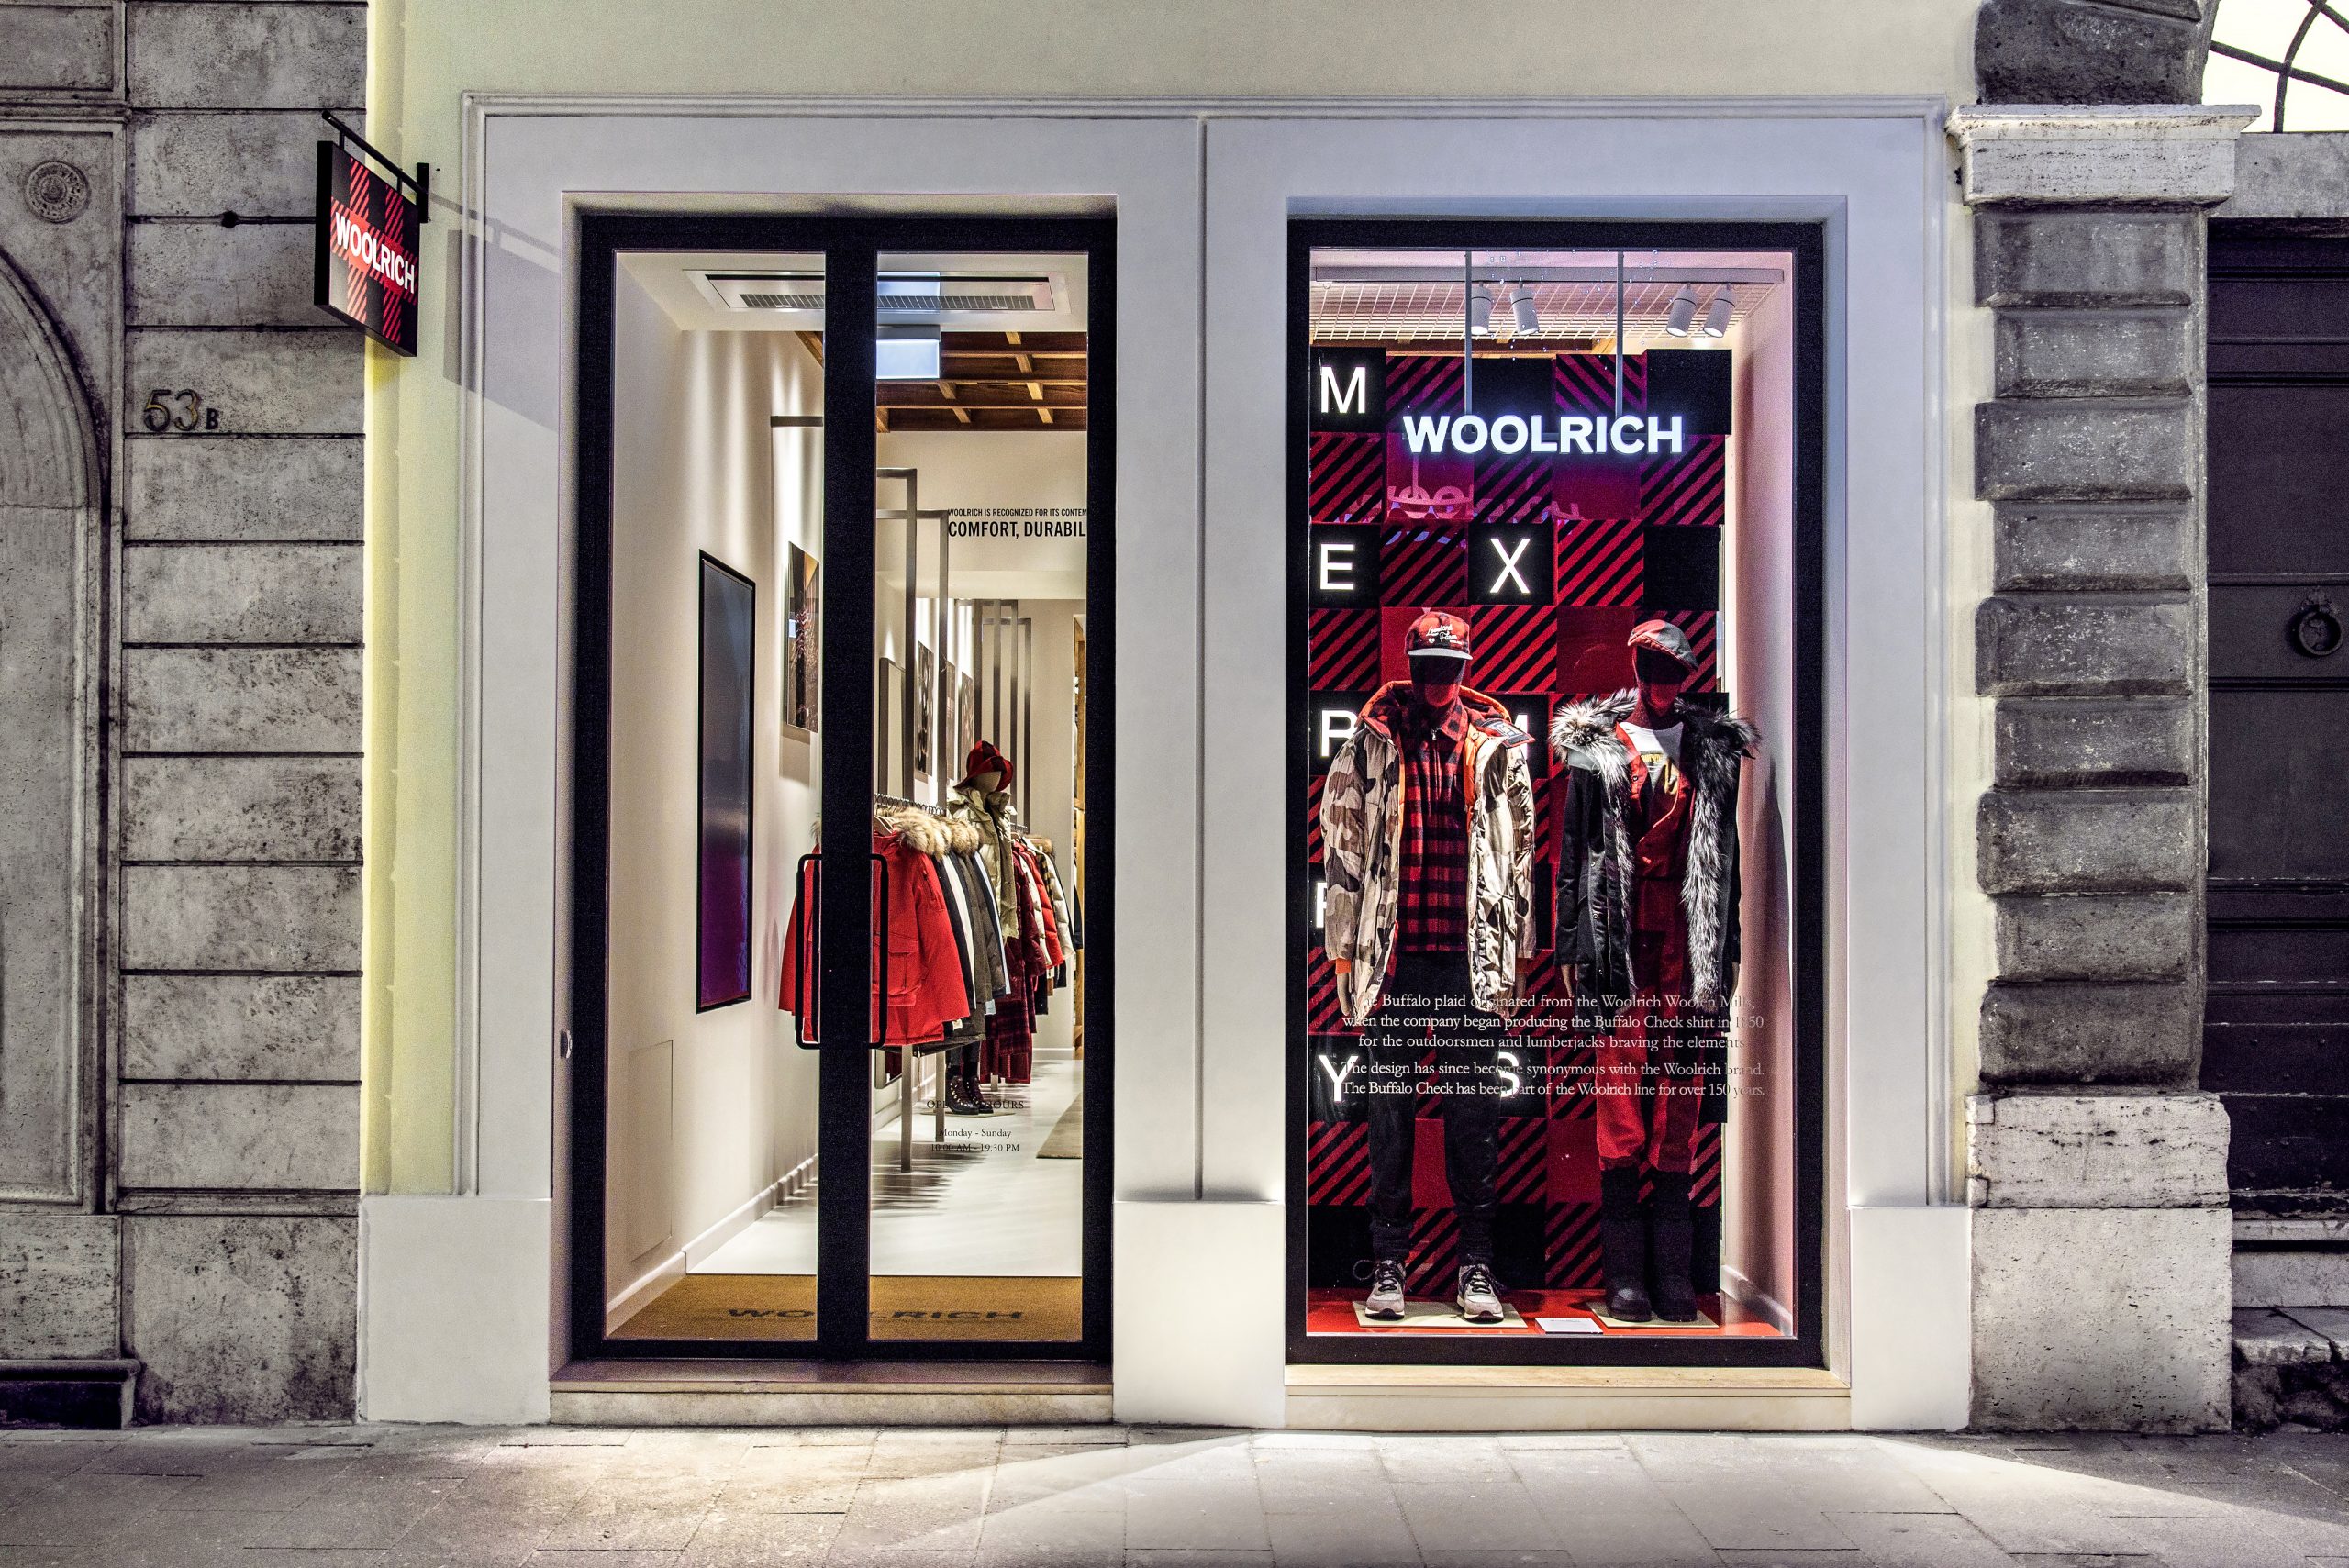 Woolrich flagship store's facade in Roma